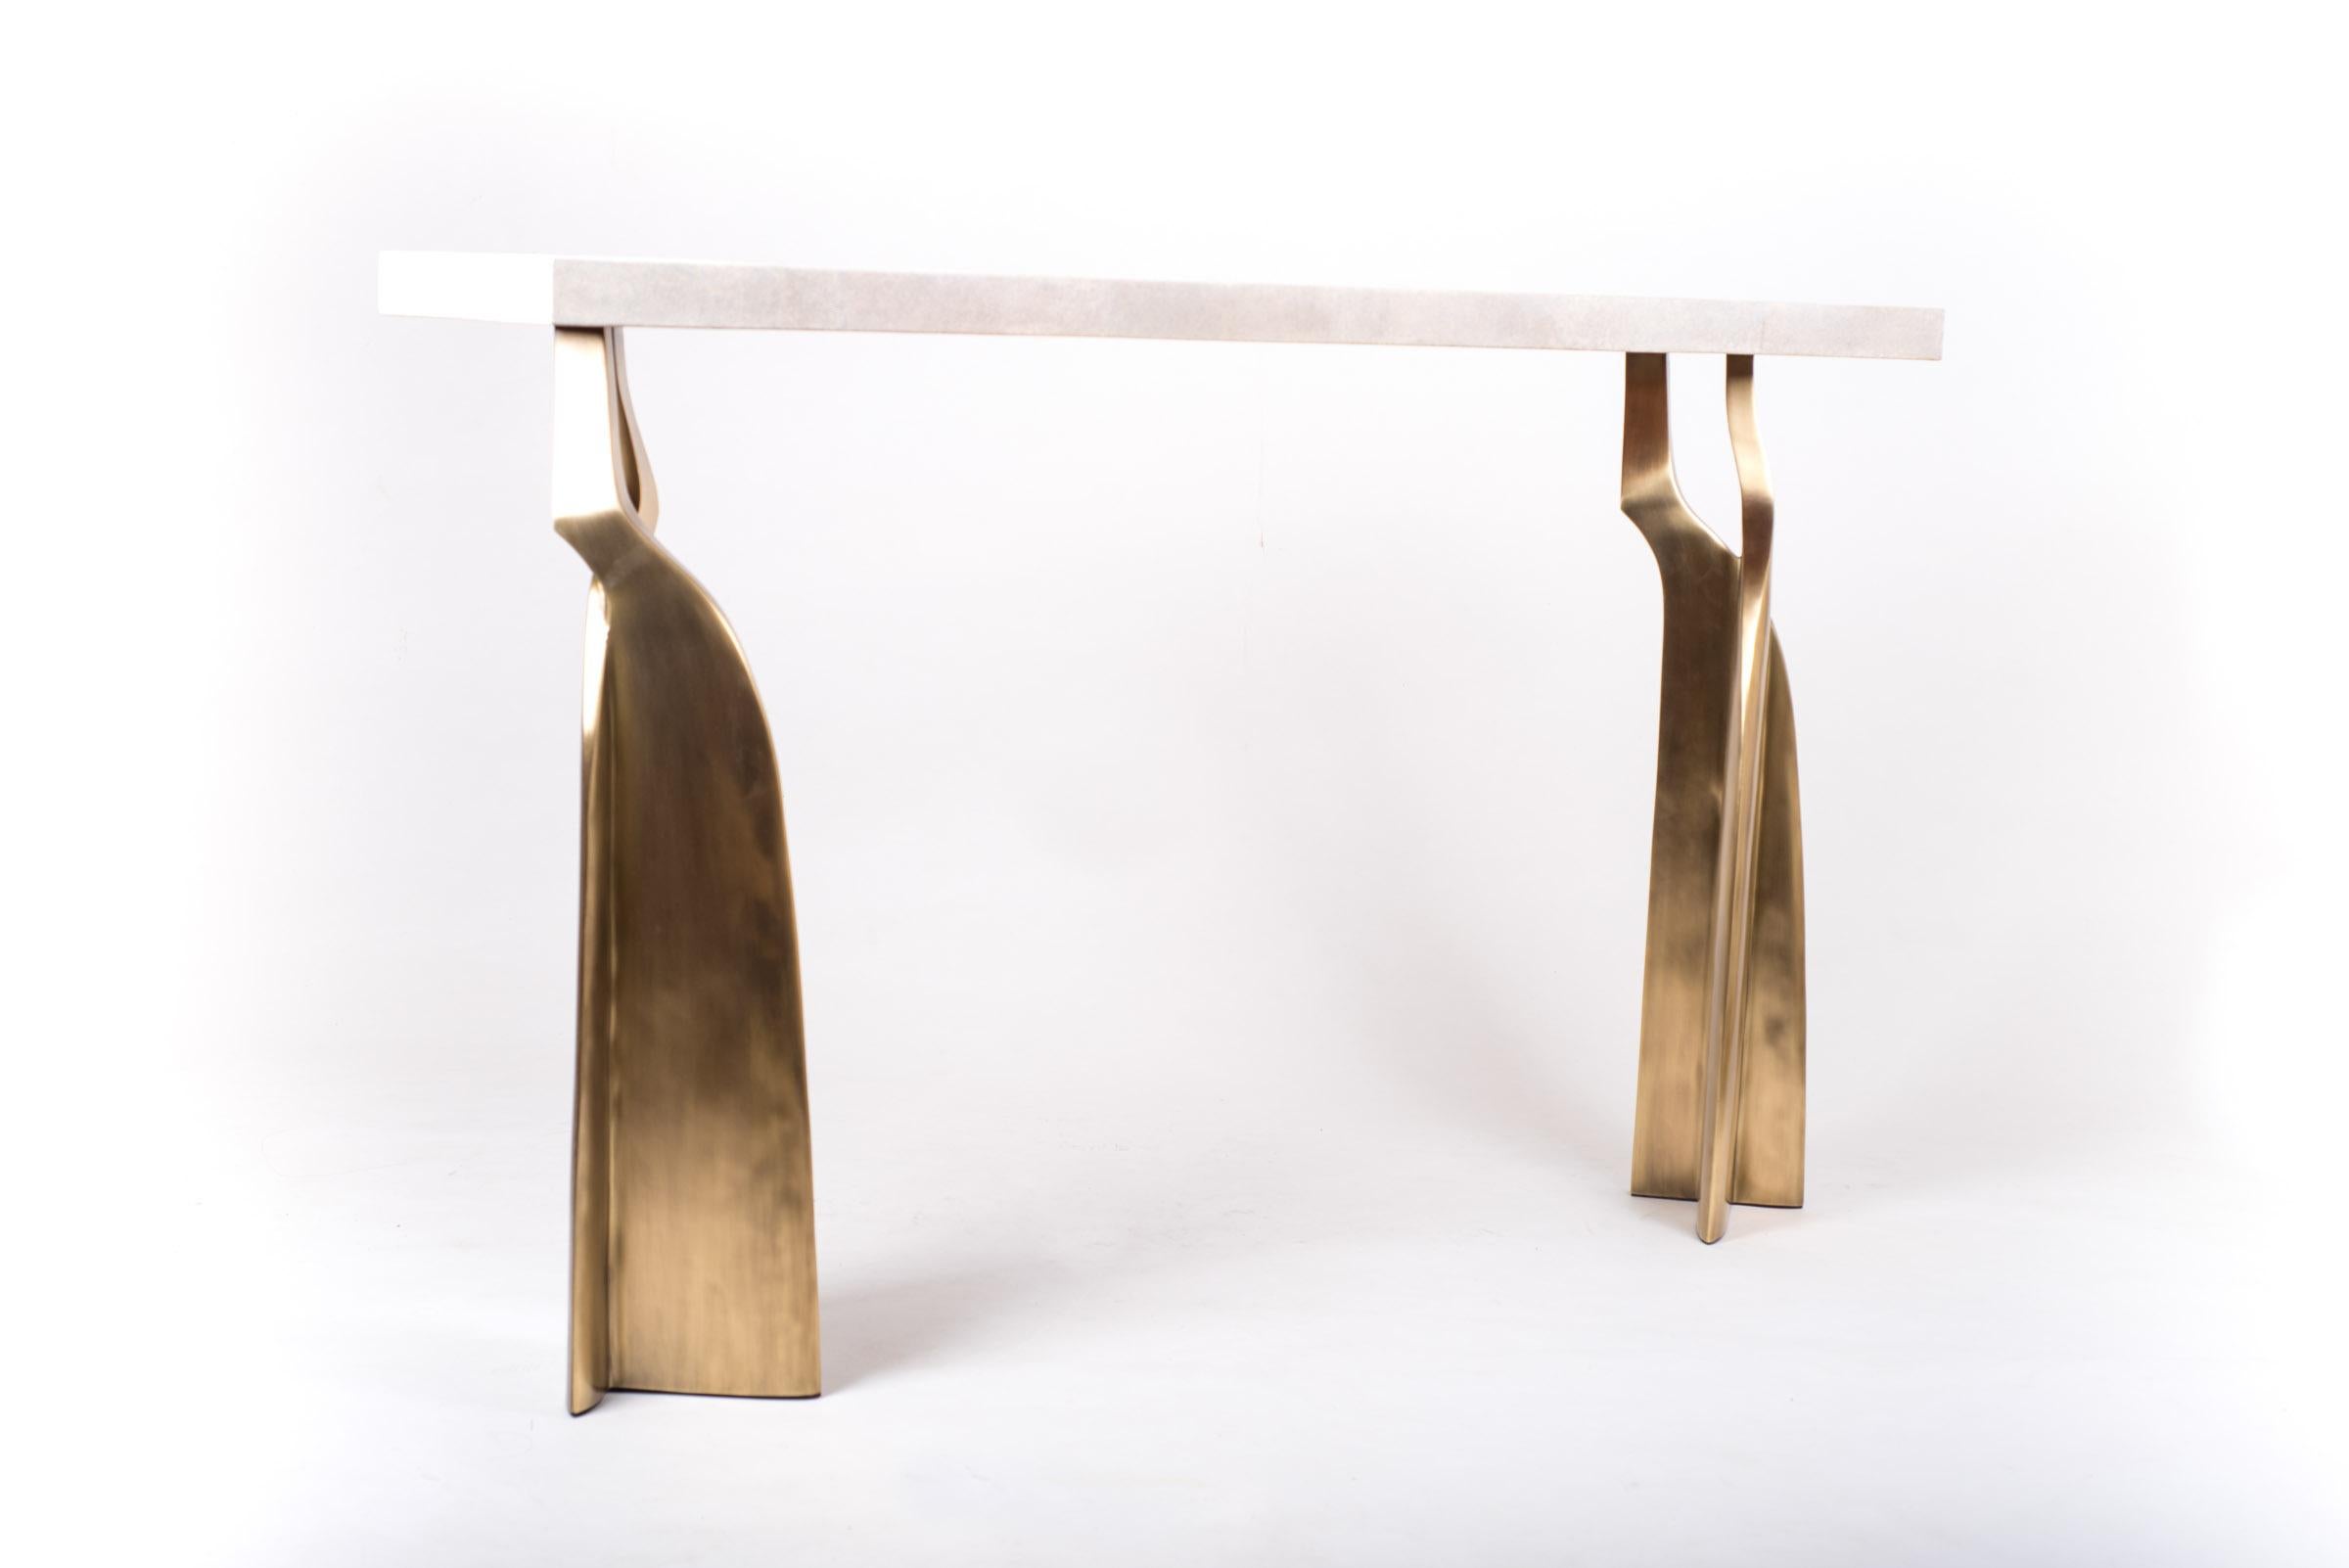 Art Deco Shagreen Console with Sculptural Bronze-Patina Brass Legs by Kifu, Paris For Sale